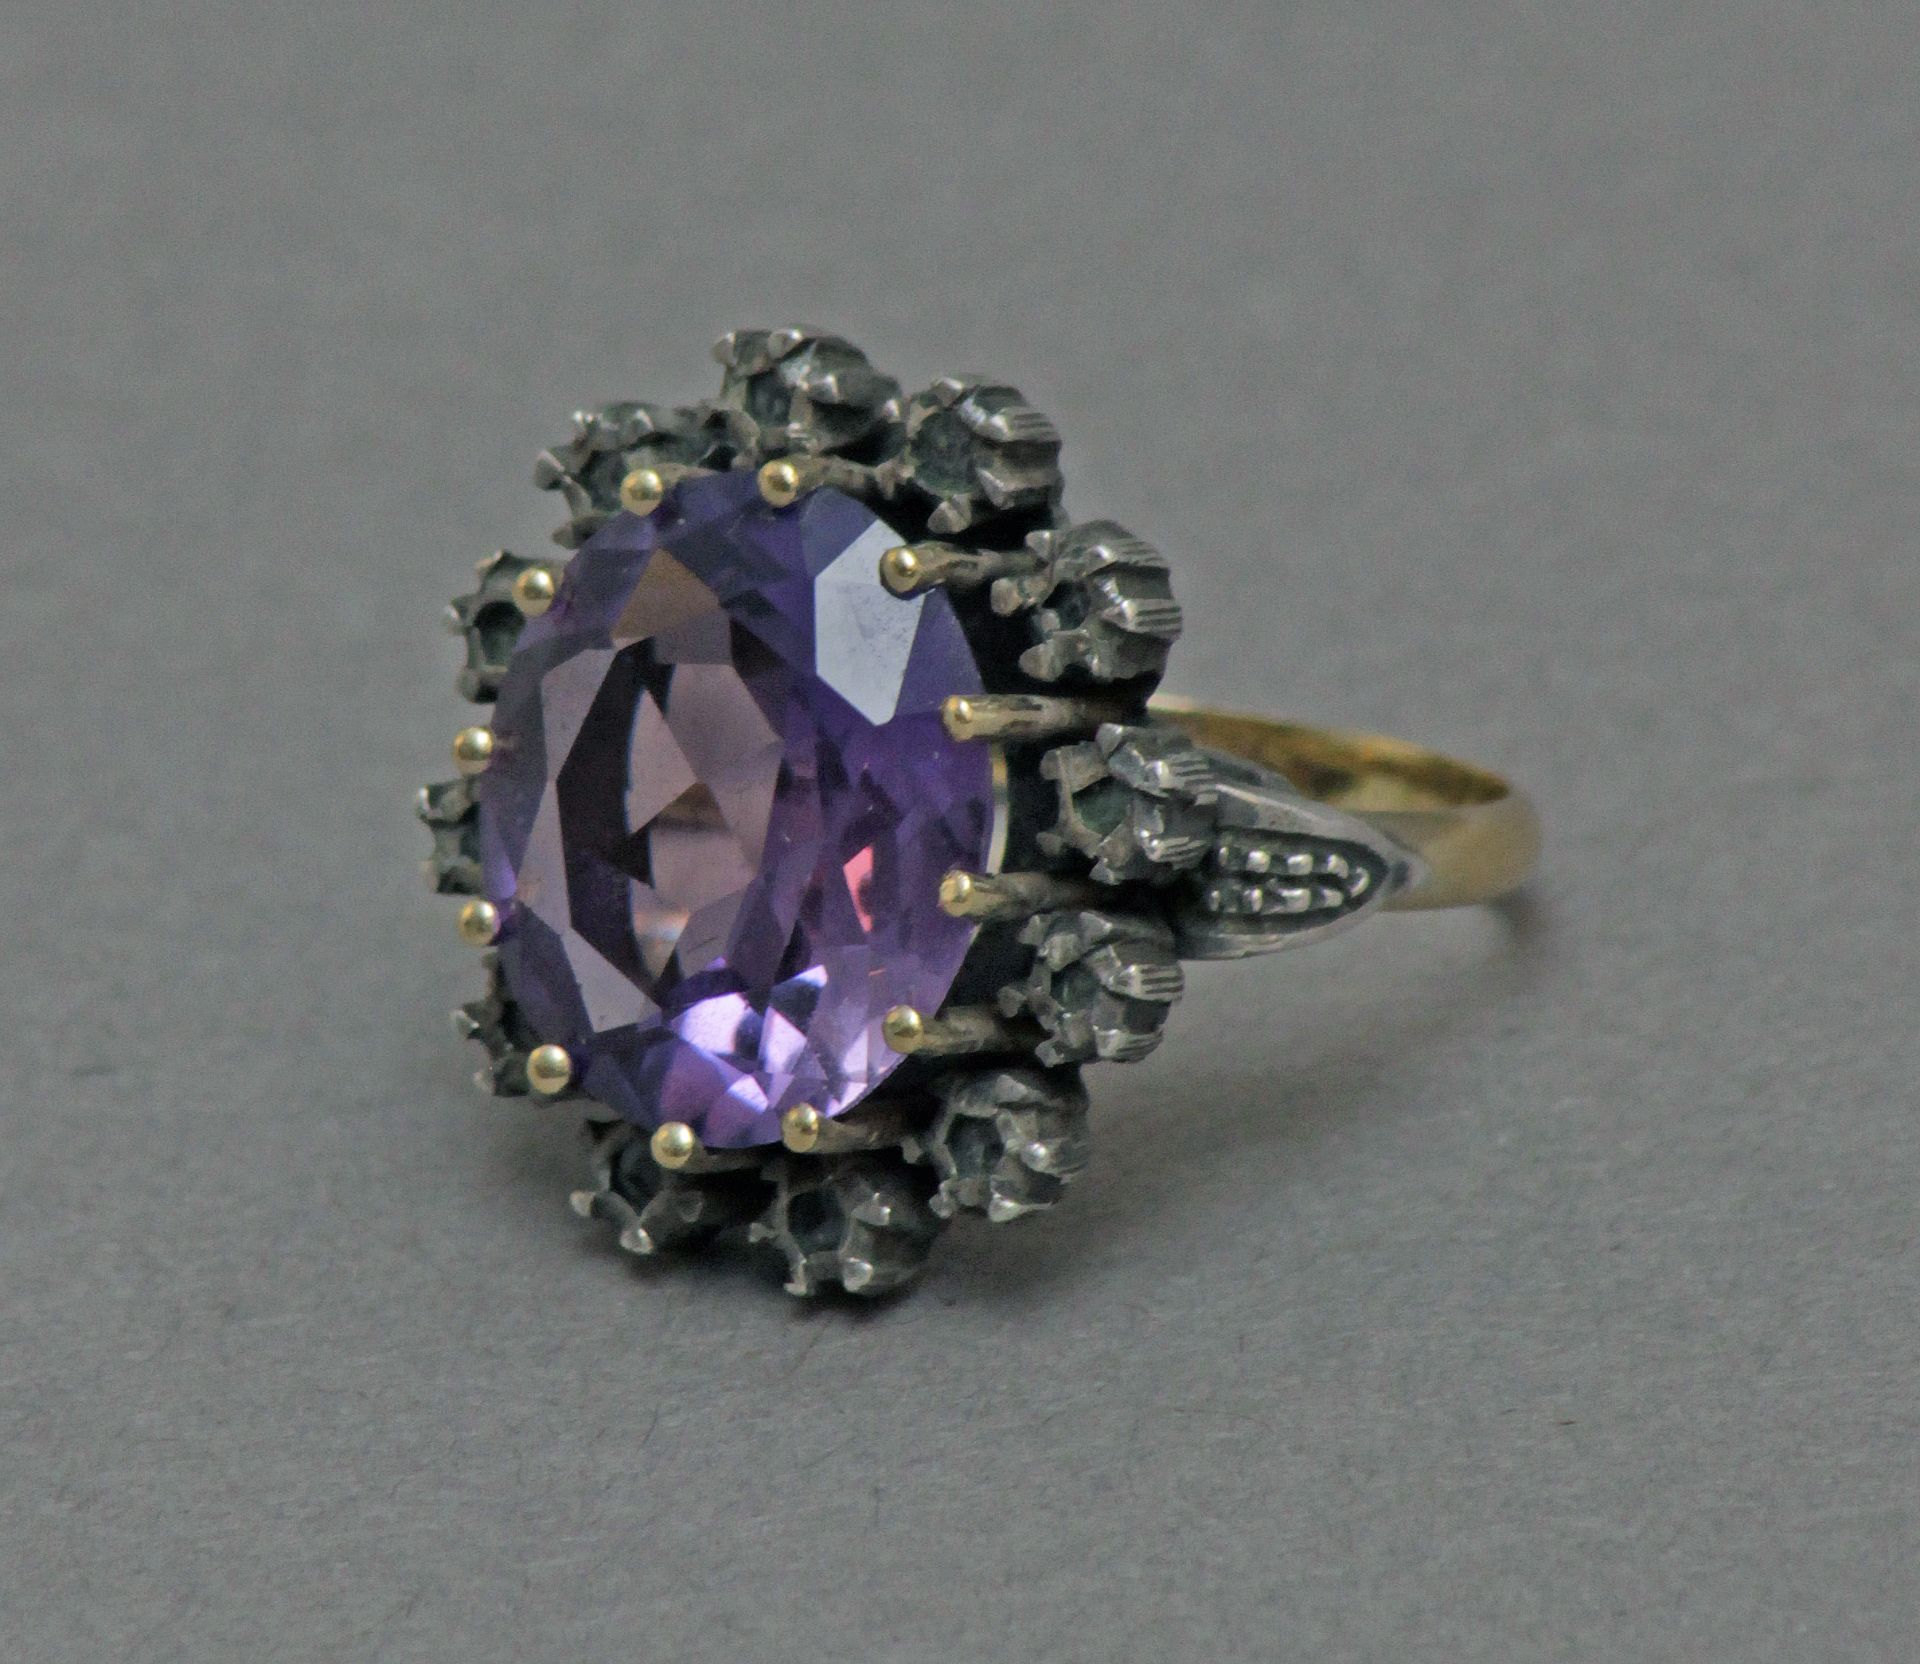 A rose cut diamonds and a rose de France cluster ring circa 1940 - Image 2 of 5